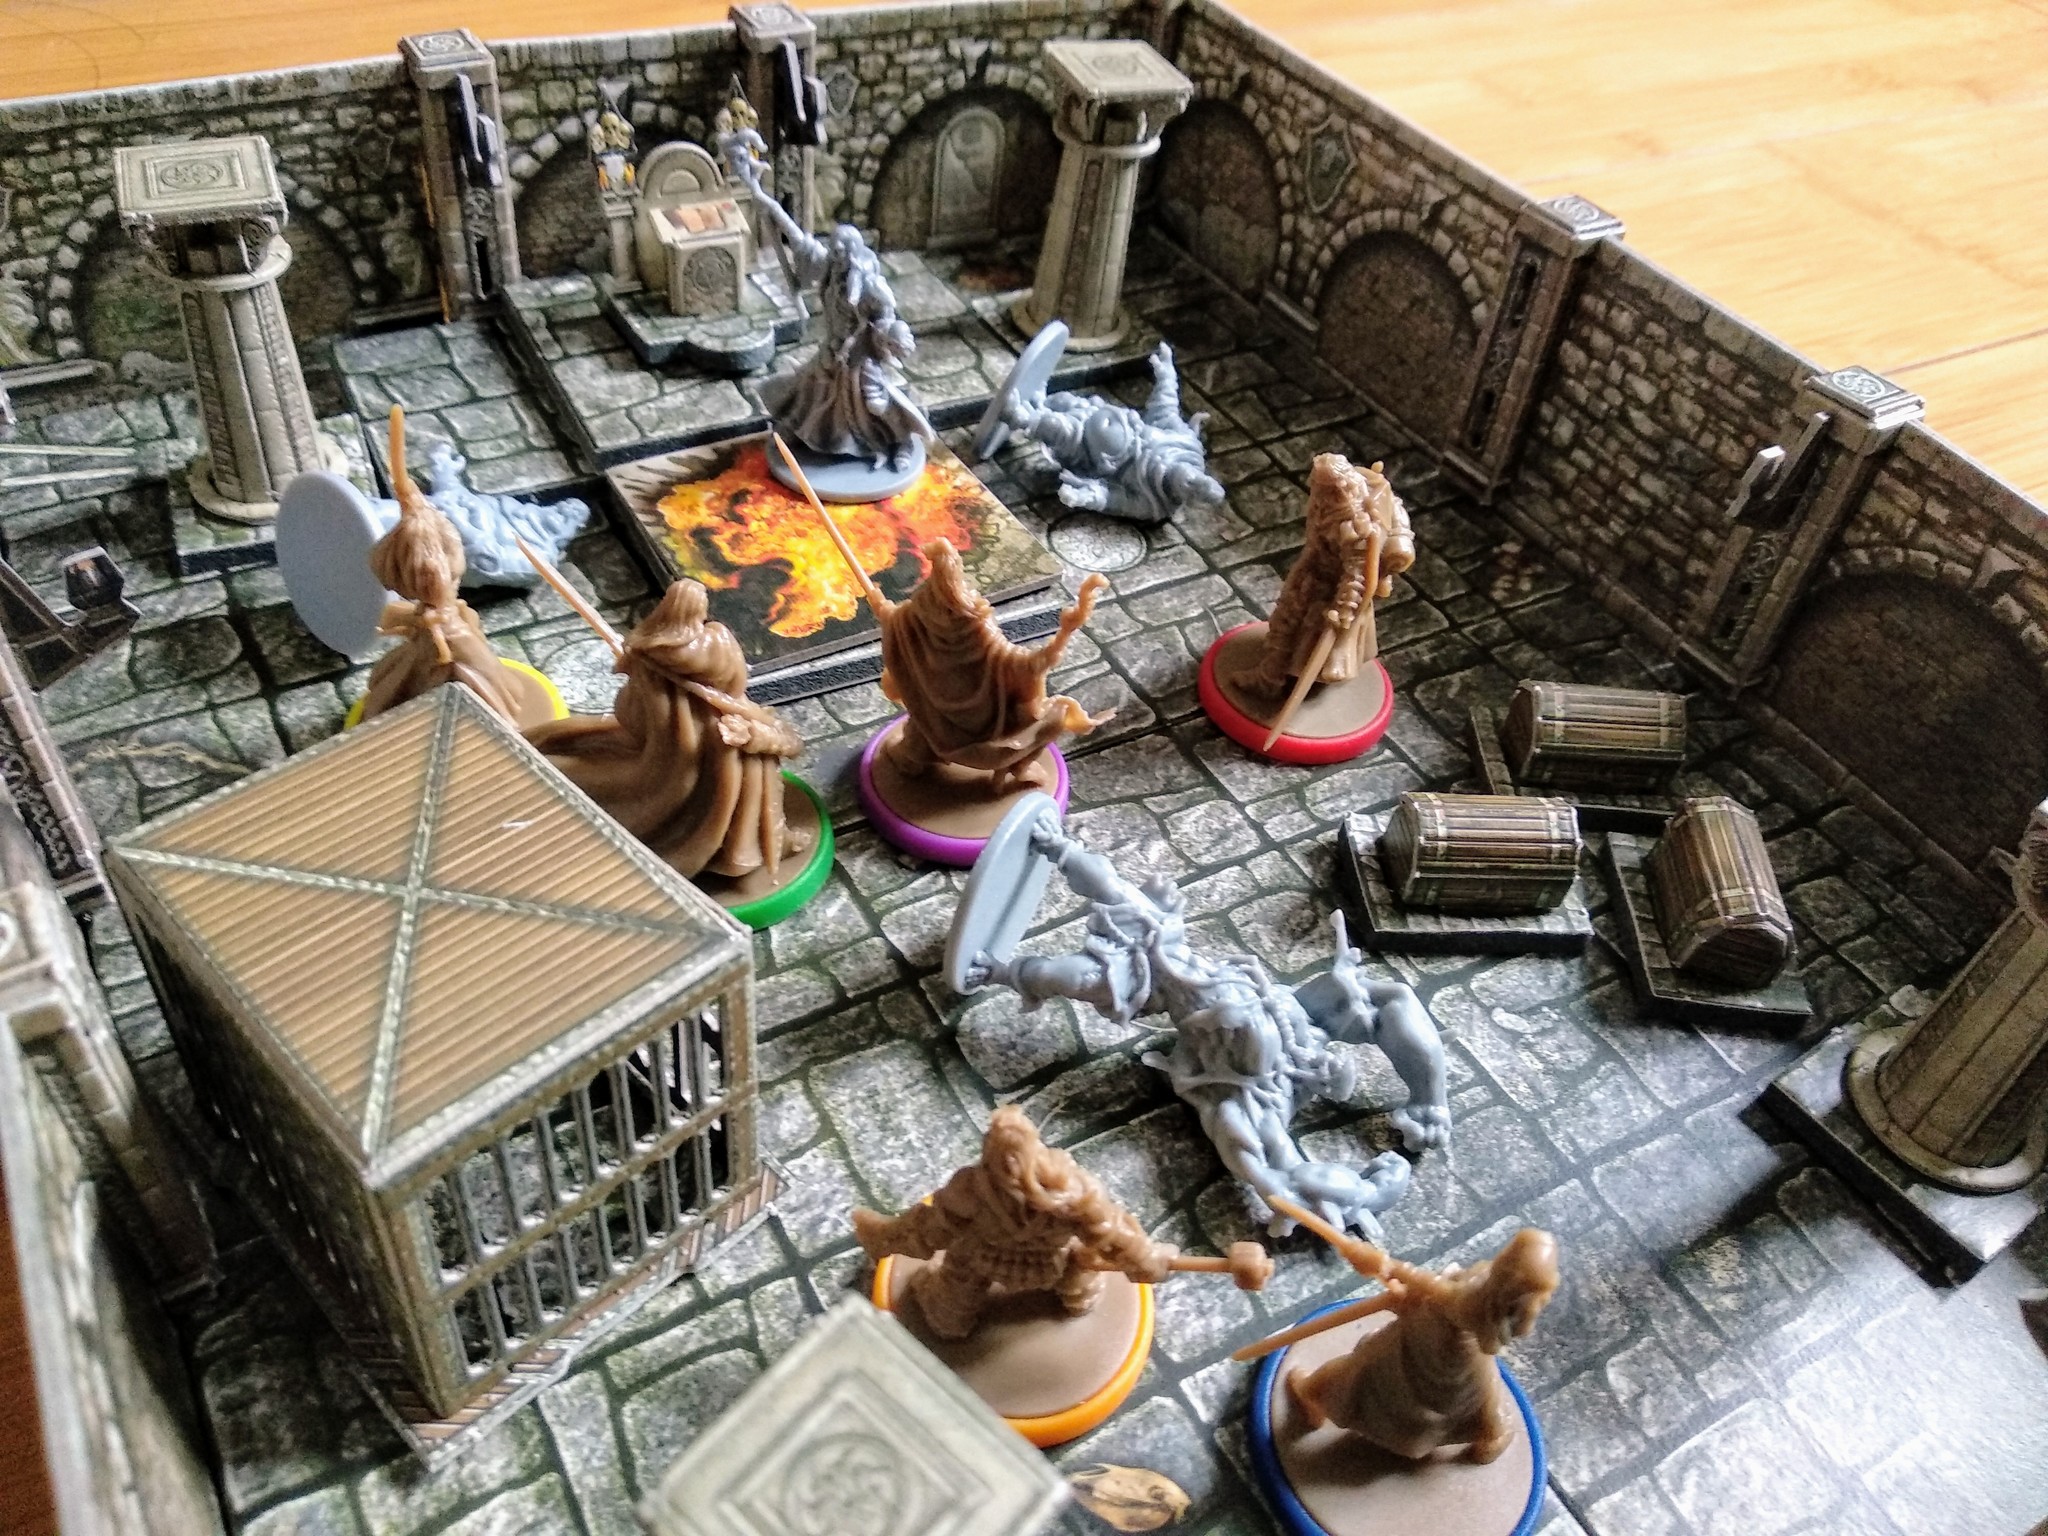 Dungeon from Umbum - Longpost, Terrane, Board games, Smart Paper, Tabletop role-playing games, Pathfinder, Dnd 5, Dungeons & dragons, My